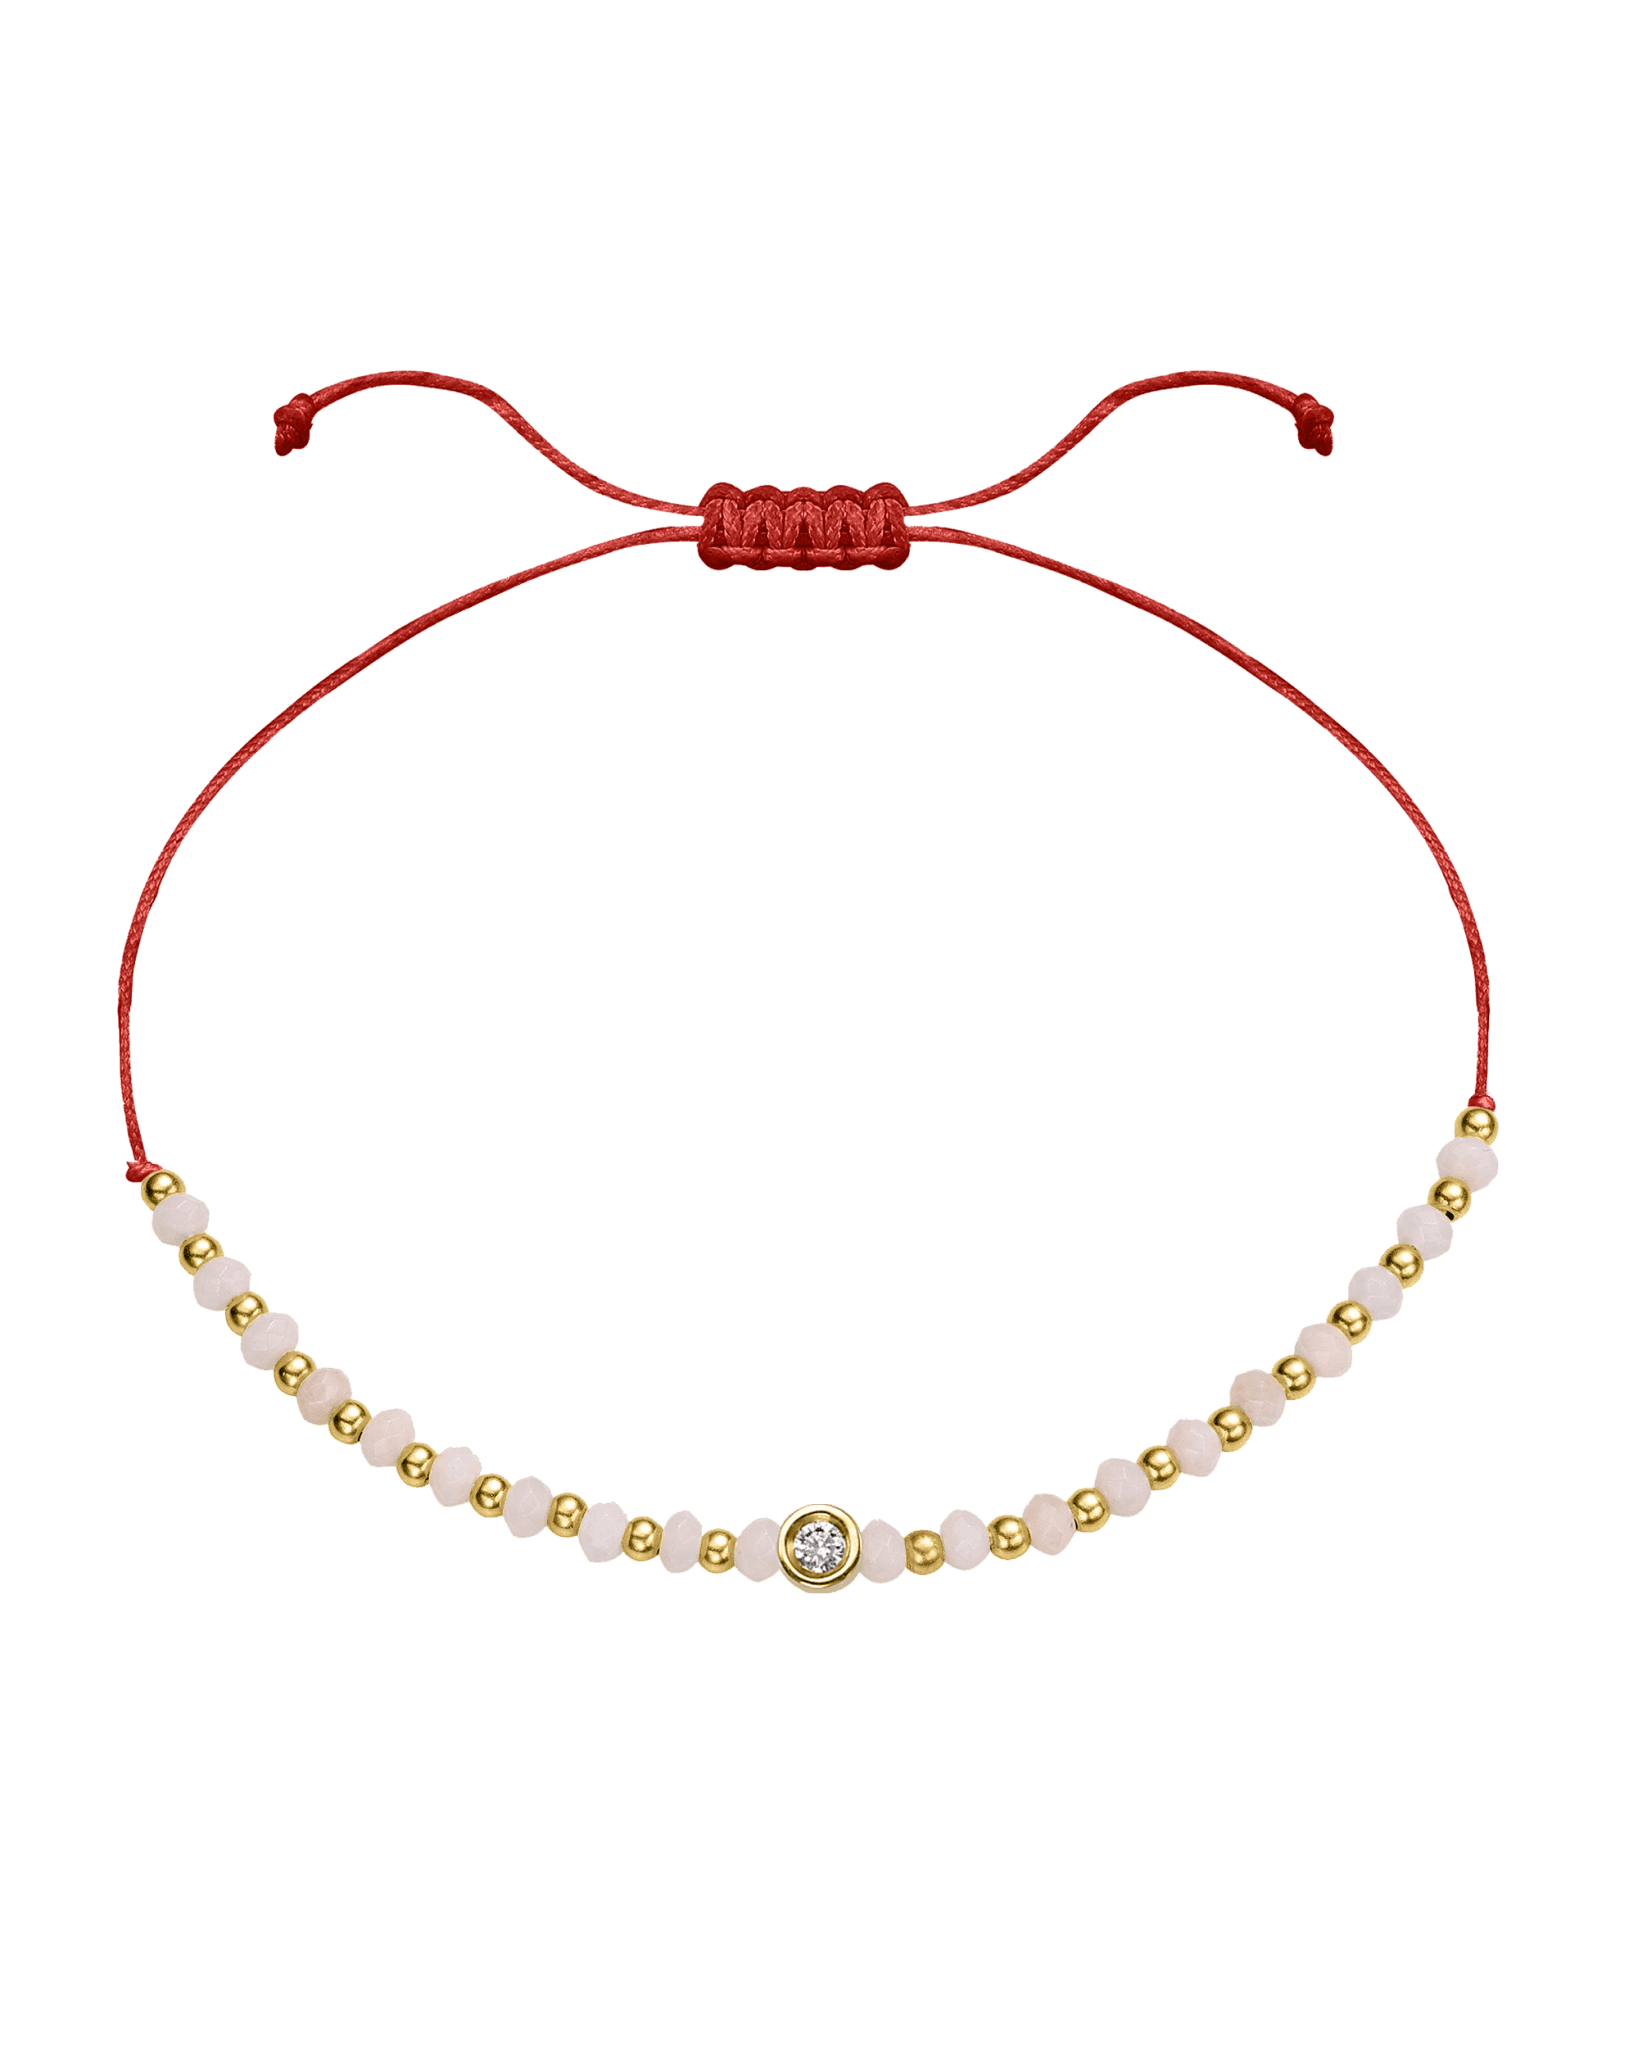 Rhodochrosite Gemstone String of Love Bracelet for Compassion - 14K Yellow Gold Bracelet 14K Solid Gold Red Small: 0.03ct 